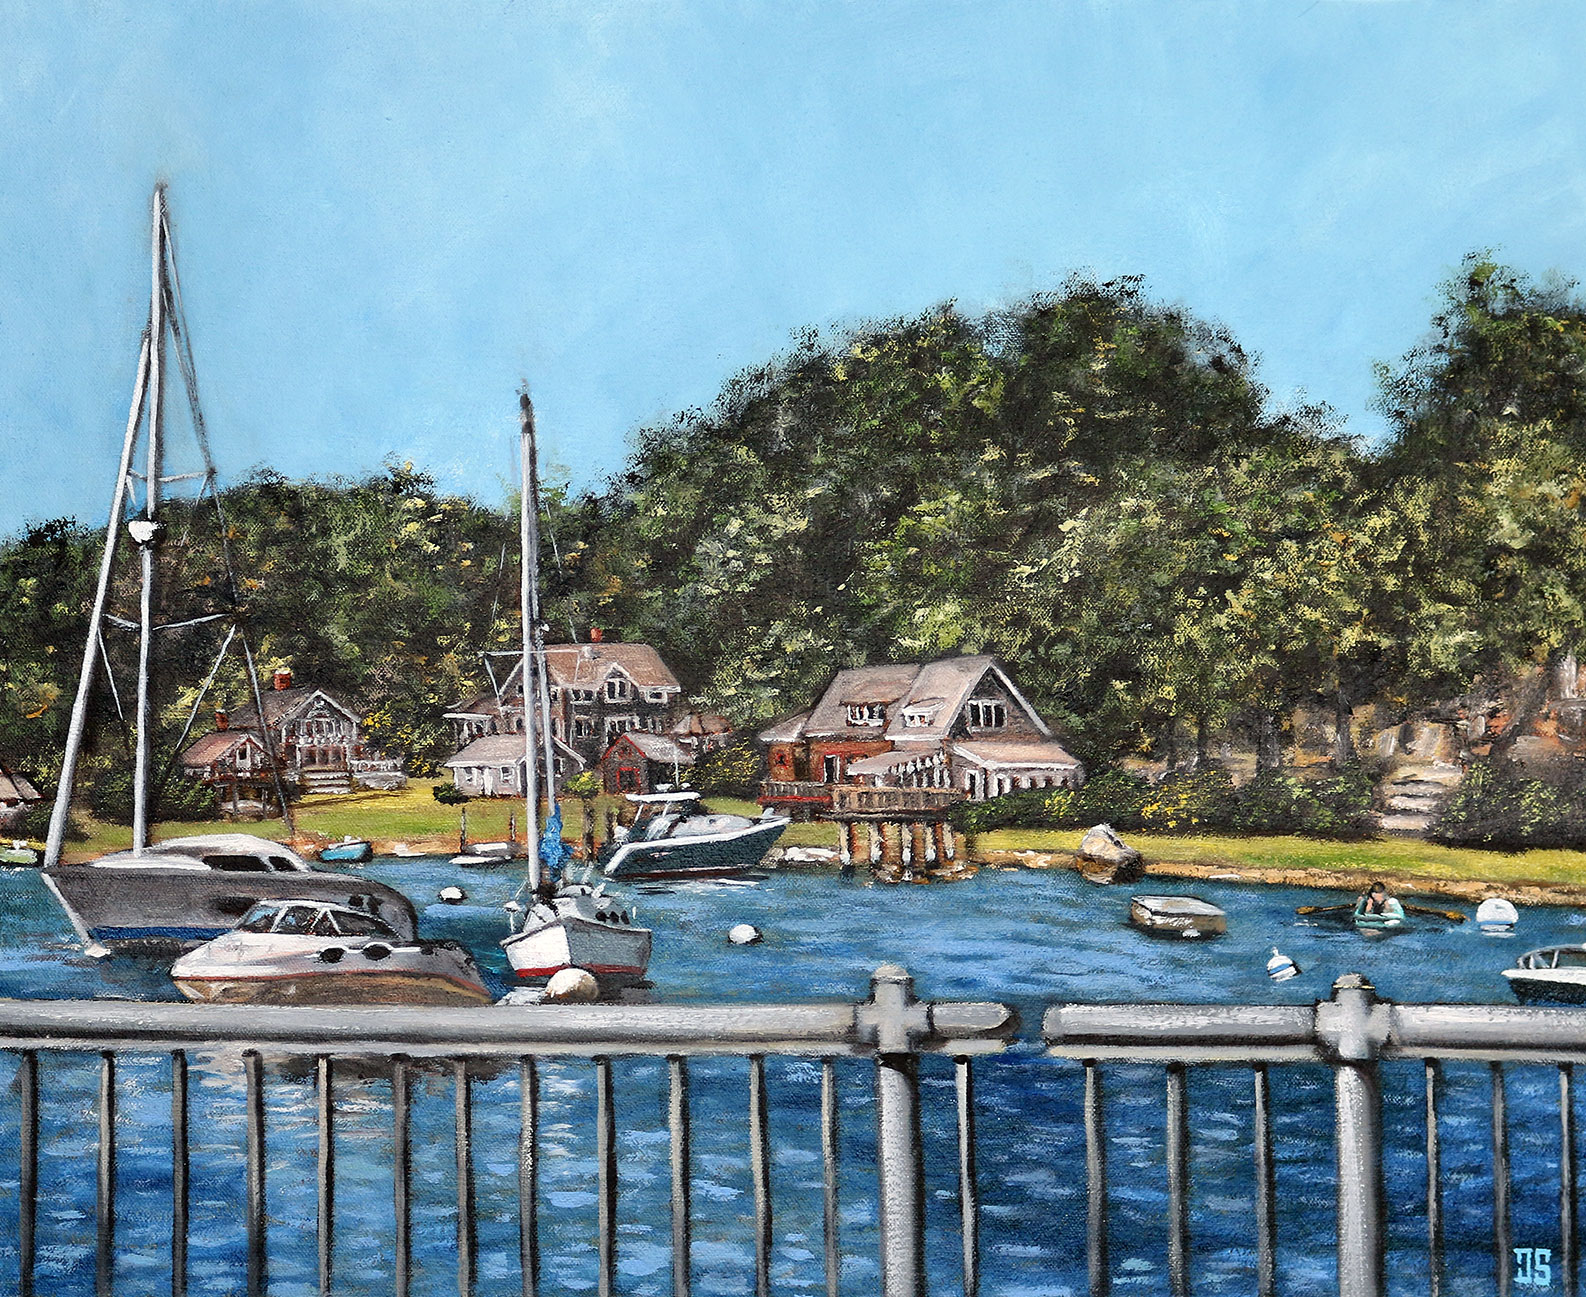 Oil painting "Woods Hole - View from the Bridge" by Jeffrey Dale Starr